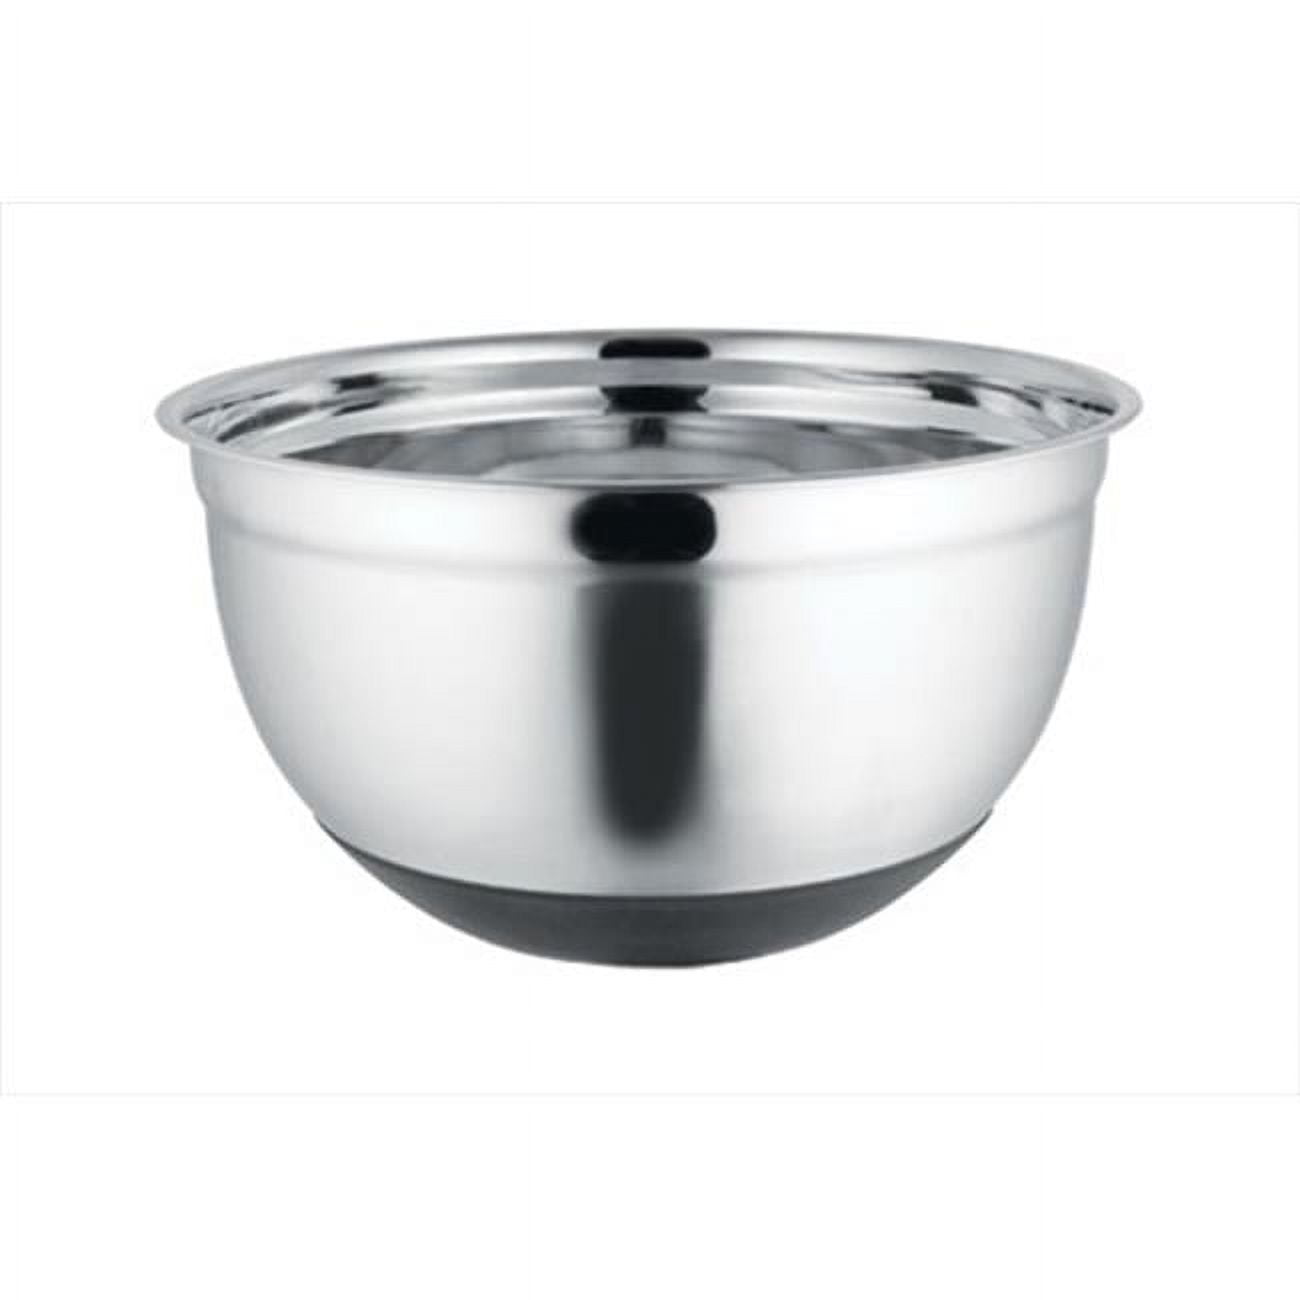 Home Basics Stainless Steel Mixing Bowl Set